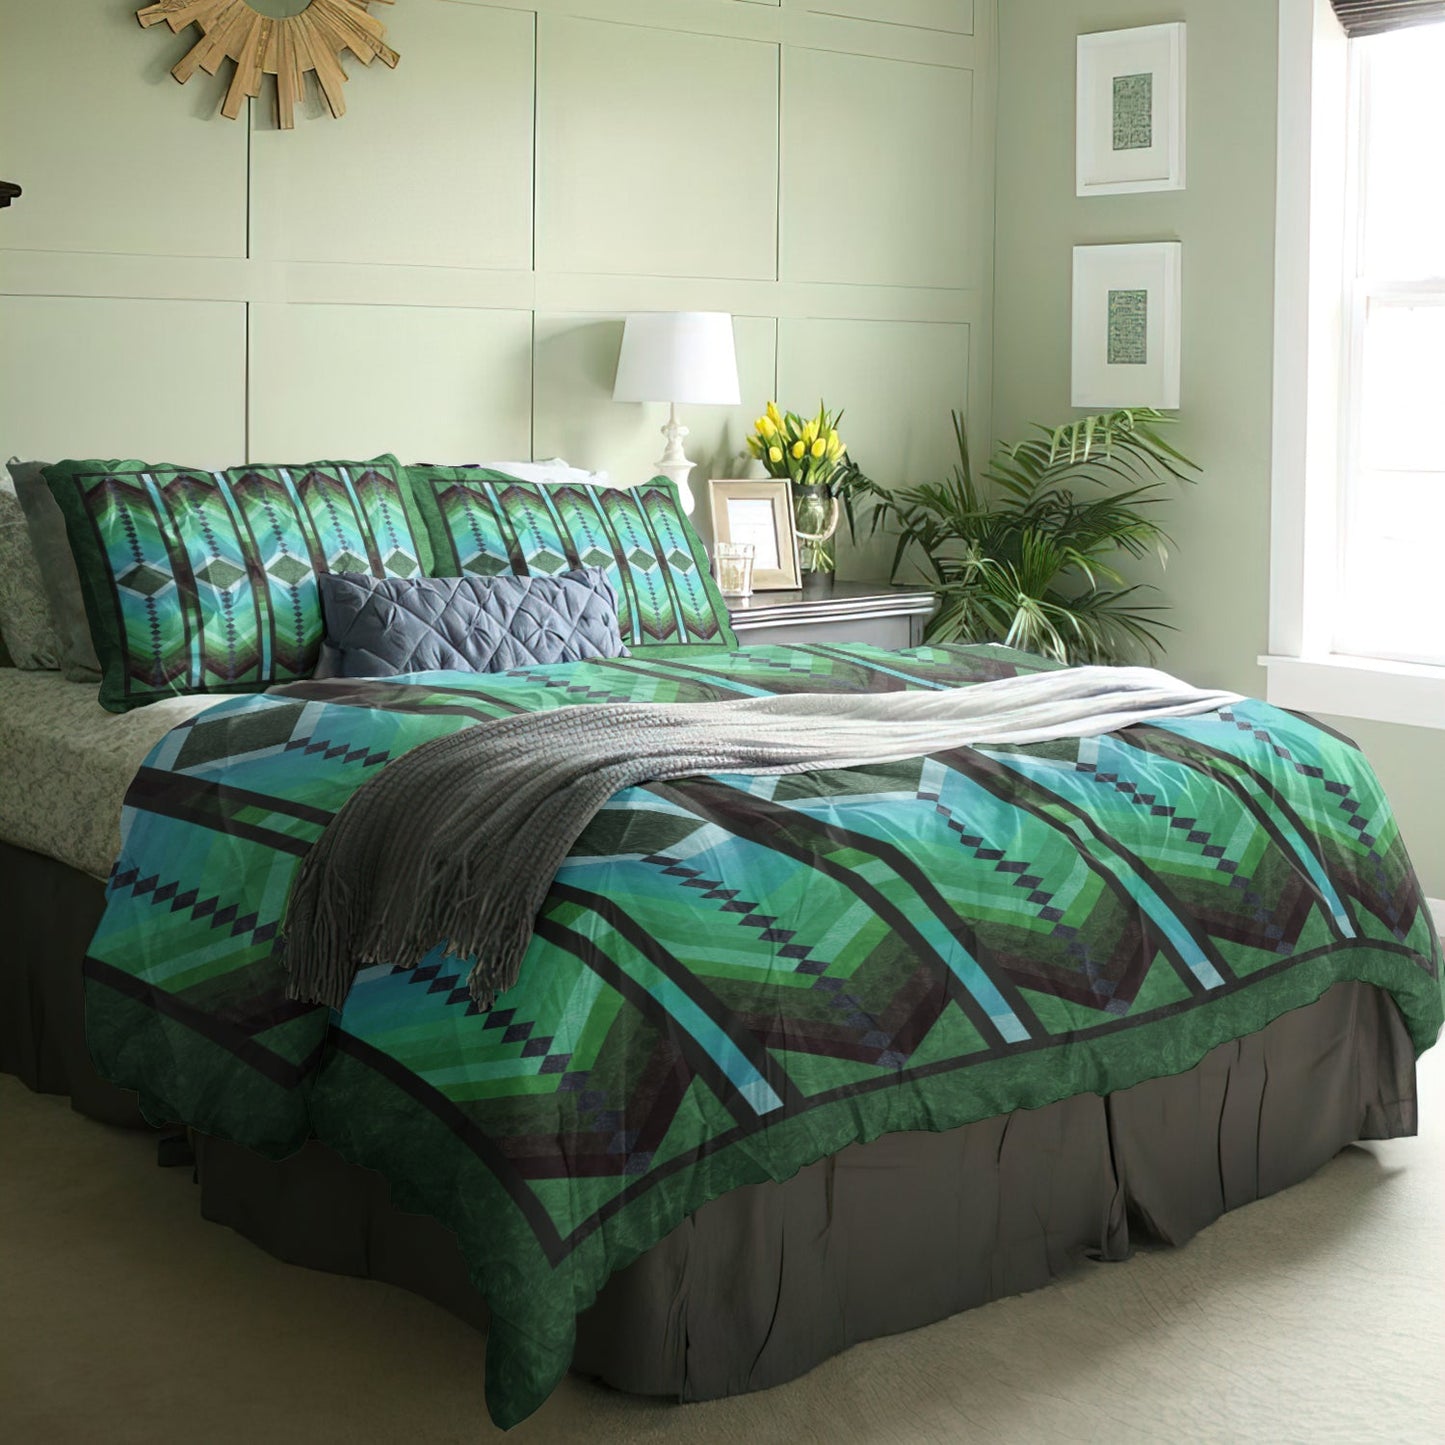 Native American Inspired Green Duvet Cover Bedding Sets MT020607ABS